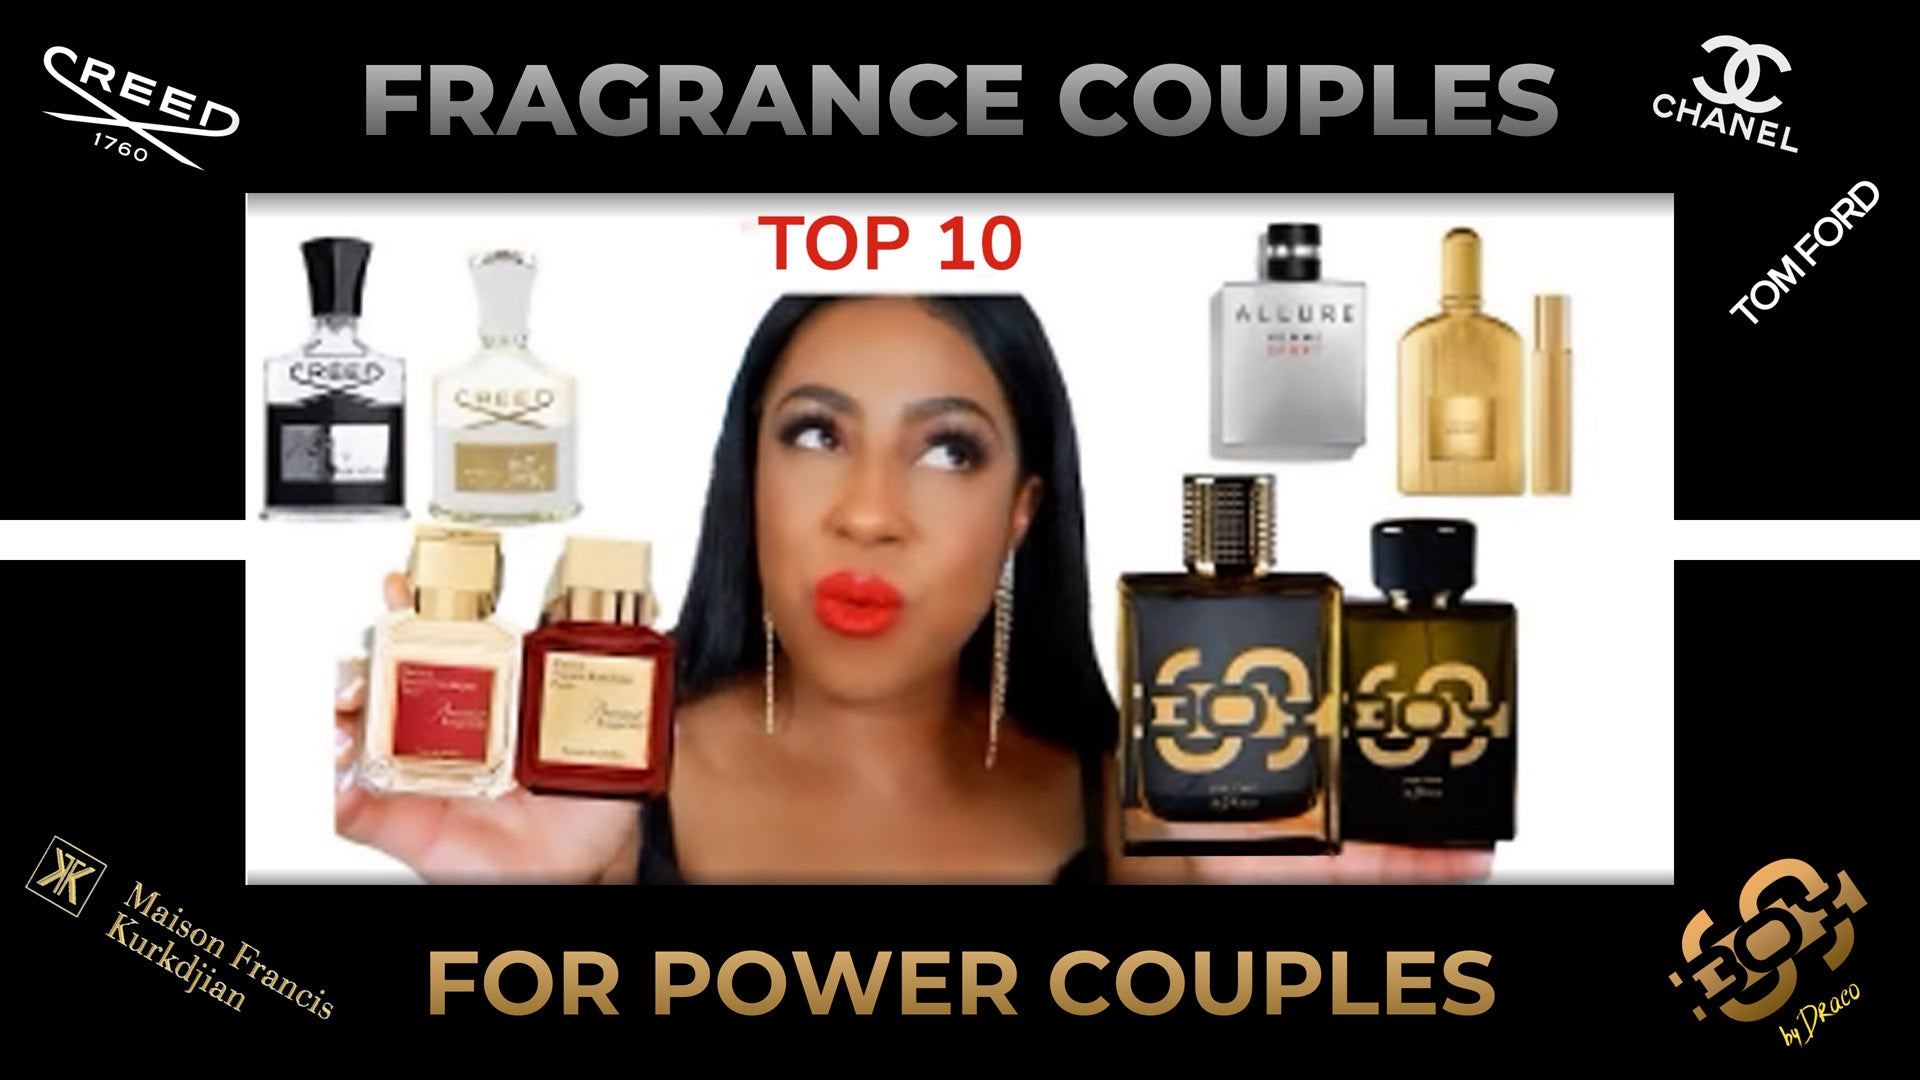 chanel alure, Creed aventus for him, creed aventus for her, MKF bacarat rouge, SBOY, For Him, Fro Her, Cheraye Lewis, Cherayeslifestyle, power couple fragrances